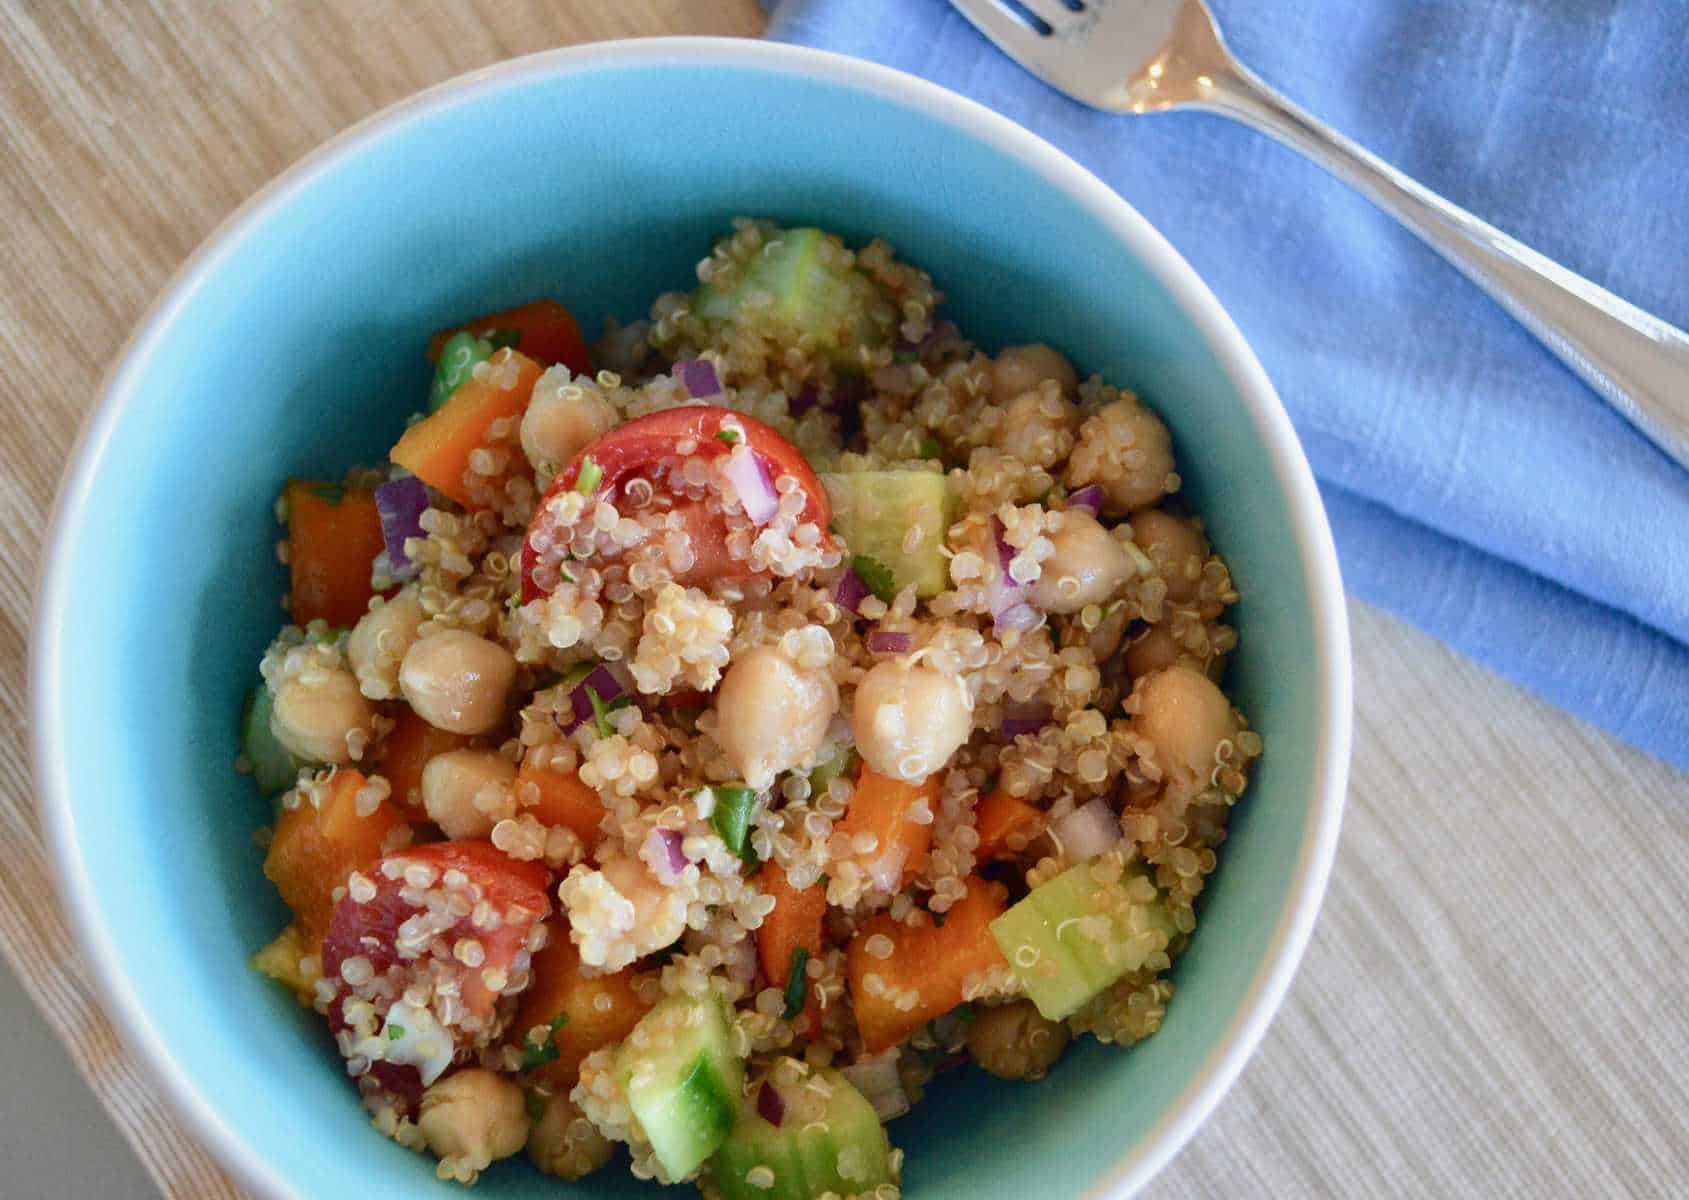 Easy Vegetable Quinoa Salad in a blue bowl with a fork and blue napkin